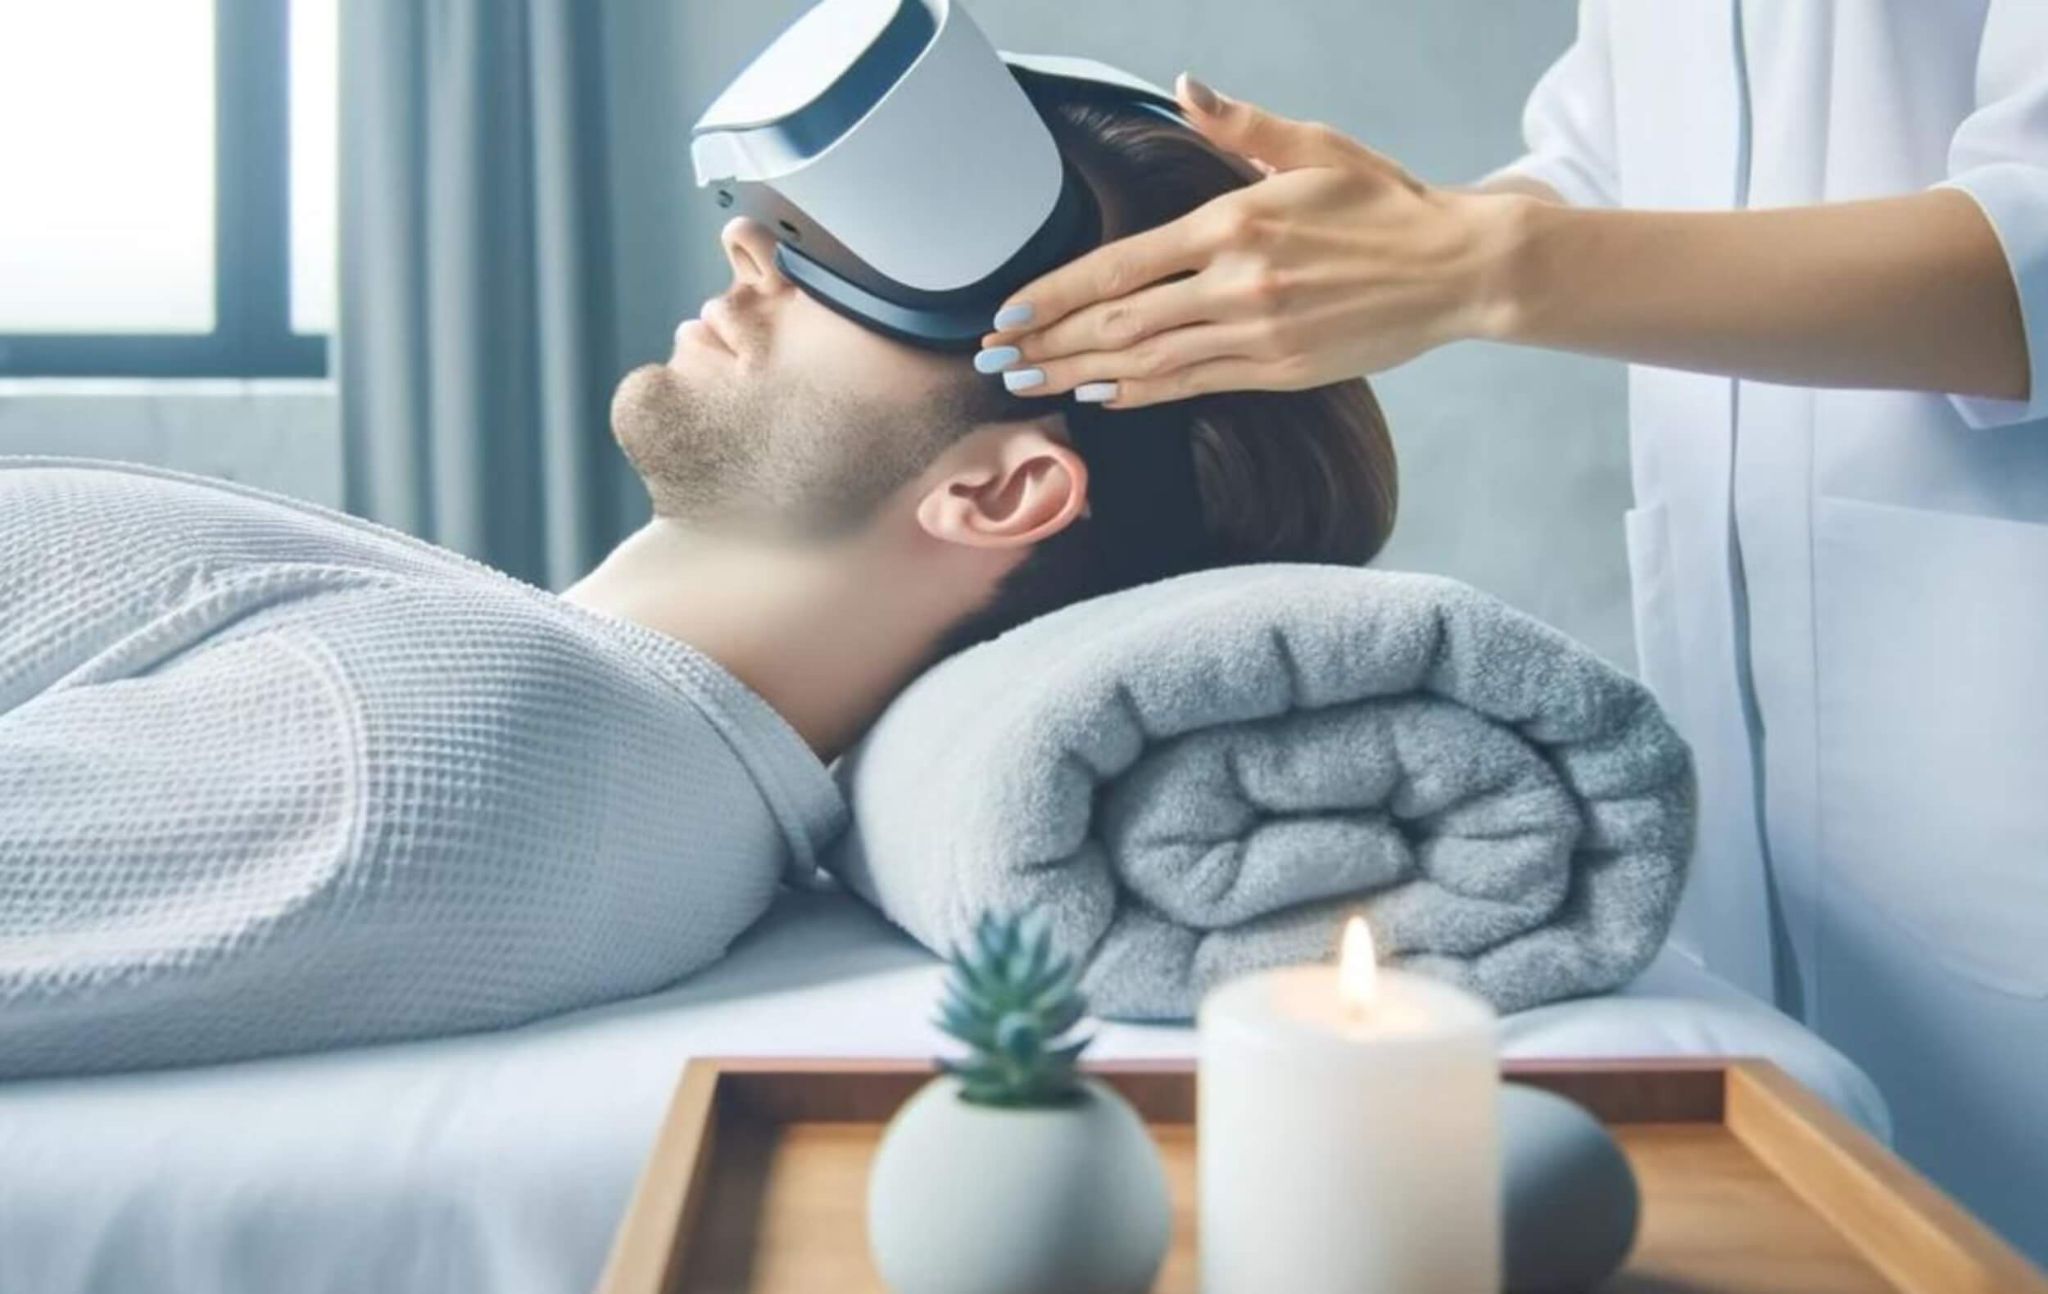 Female client experiencing VR massage, one of the most popular innovative massage techniques